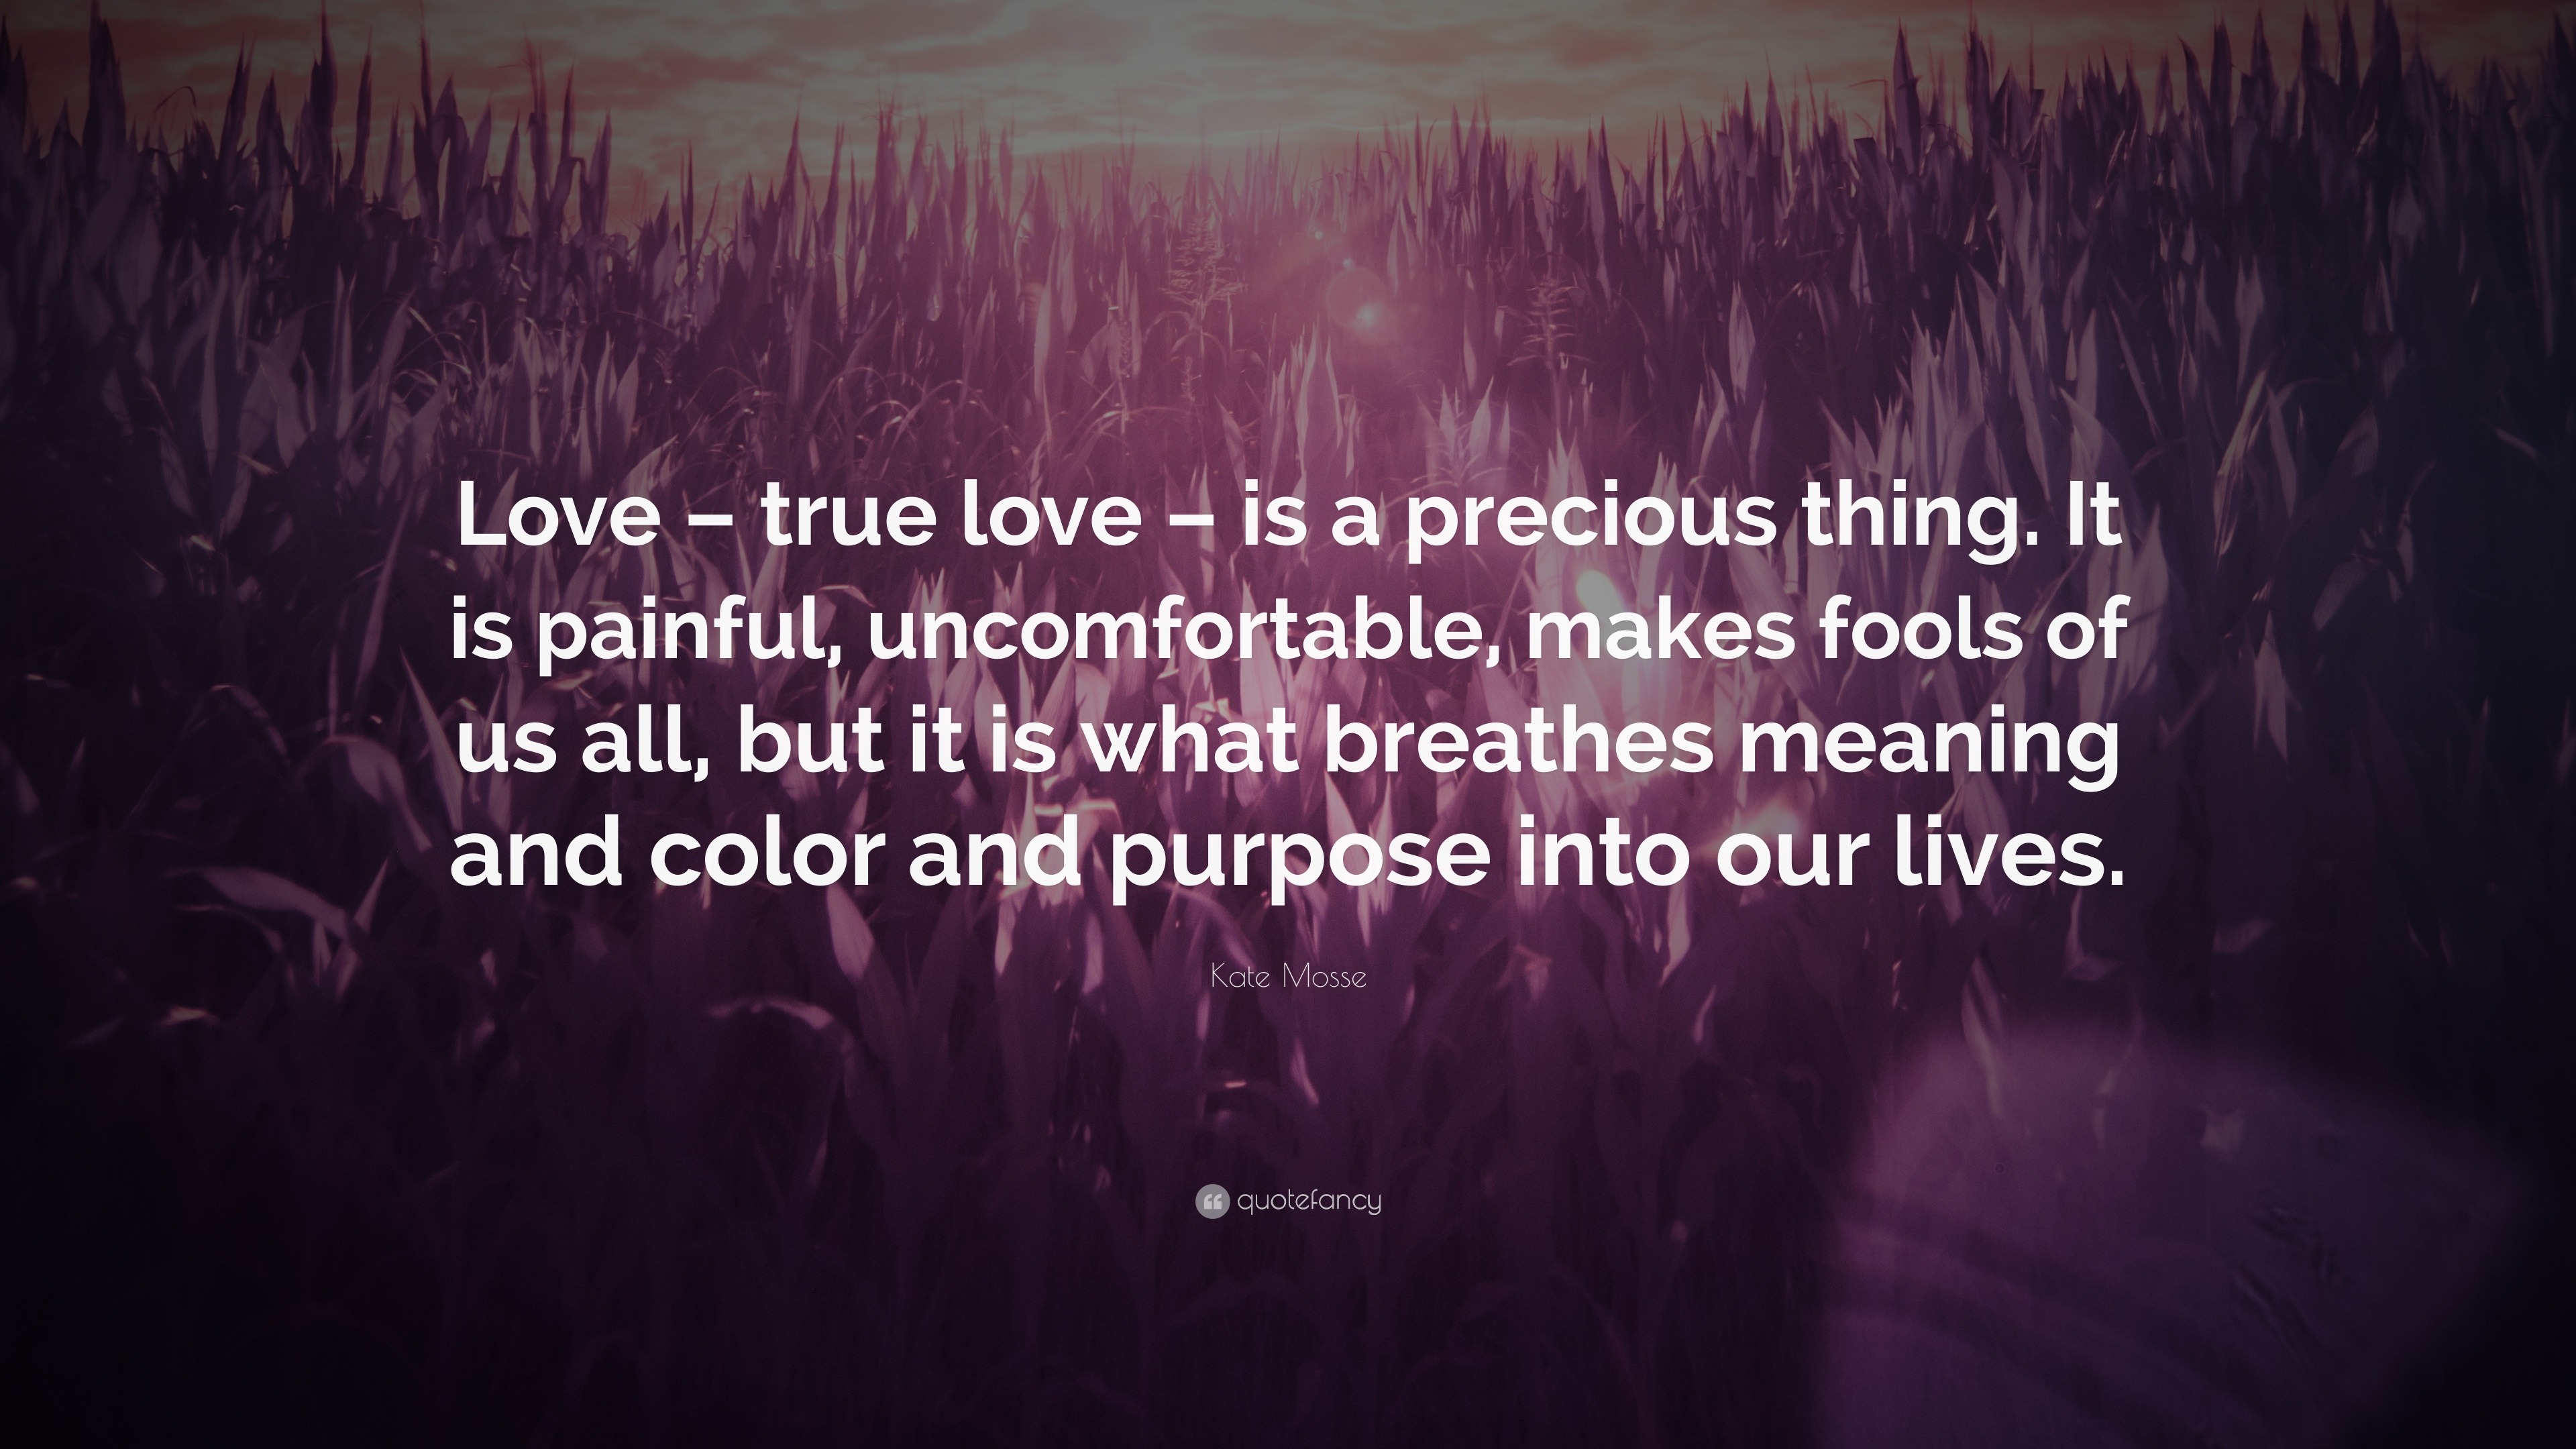 Kate Mosse Quote “Love – true love – is a precious thing It